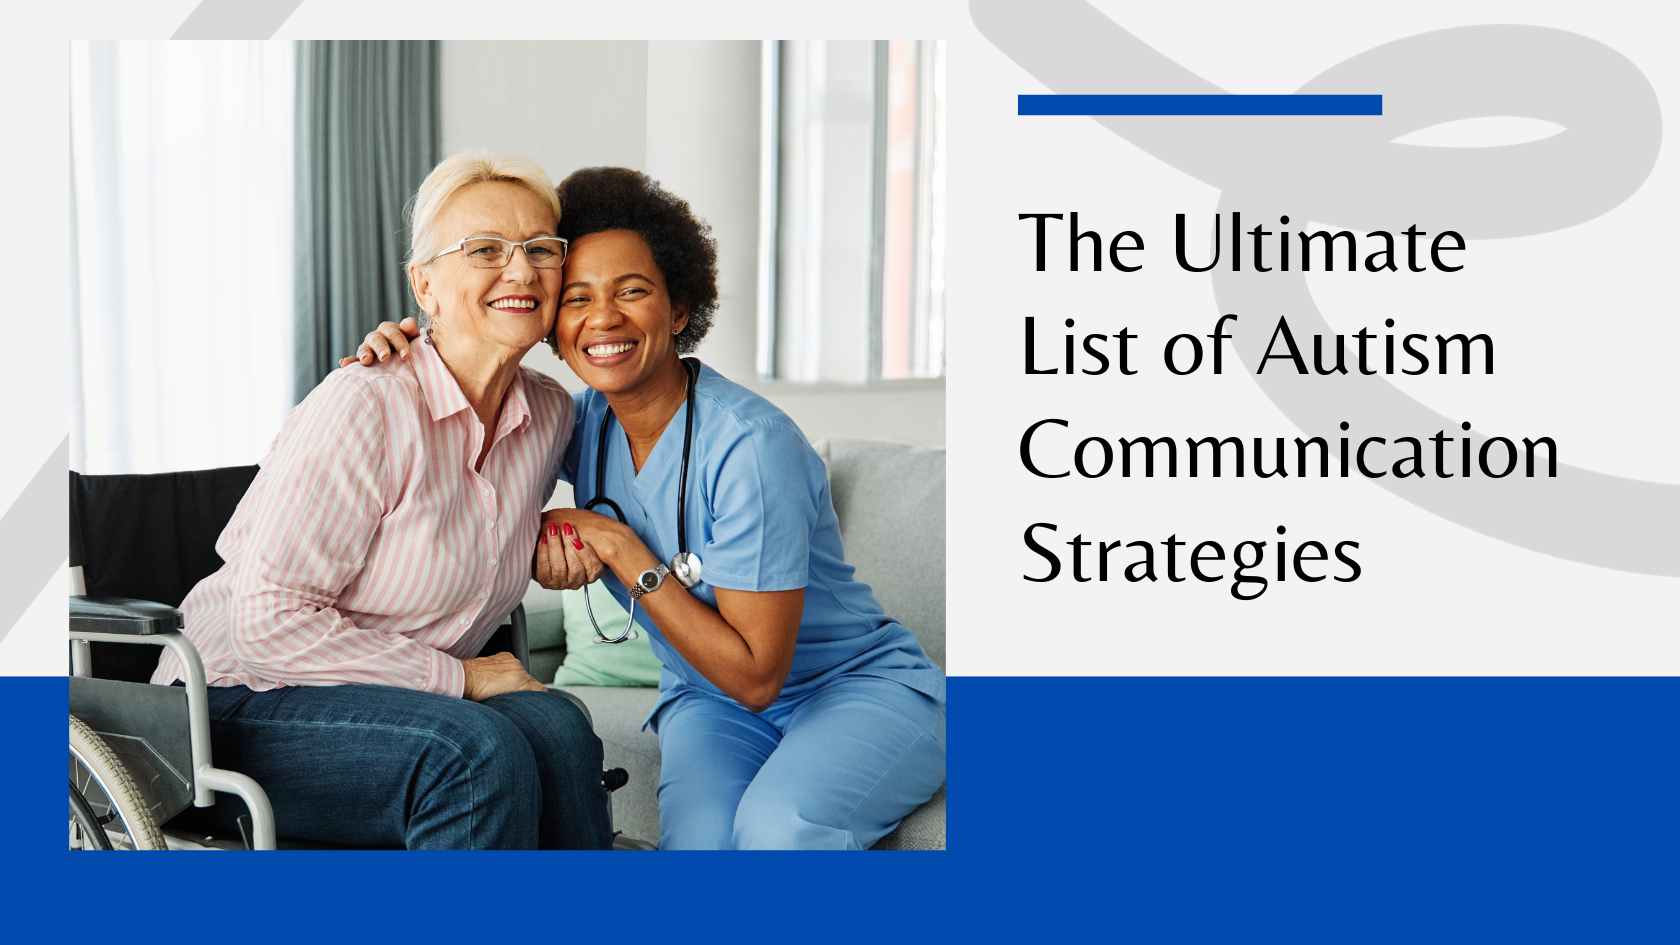 The Ultimate List of Autism Communication Strategies